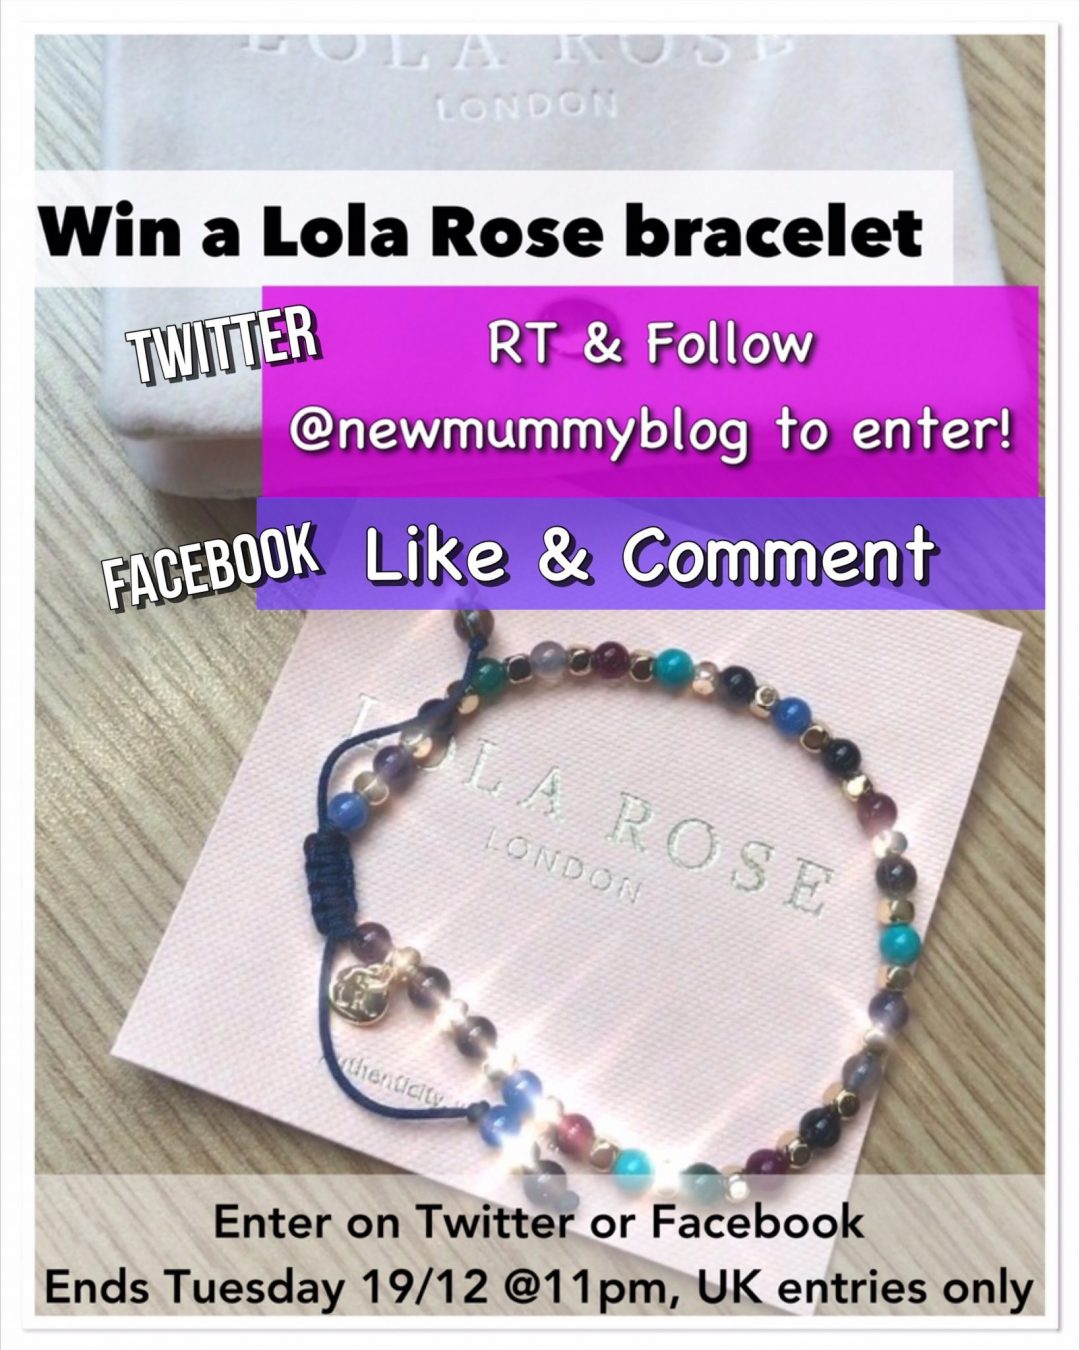 Win a Lola Rose bracelet in New Mummy Blog's giveaway on Twitter and Facebook